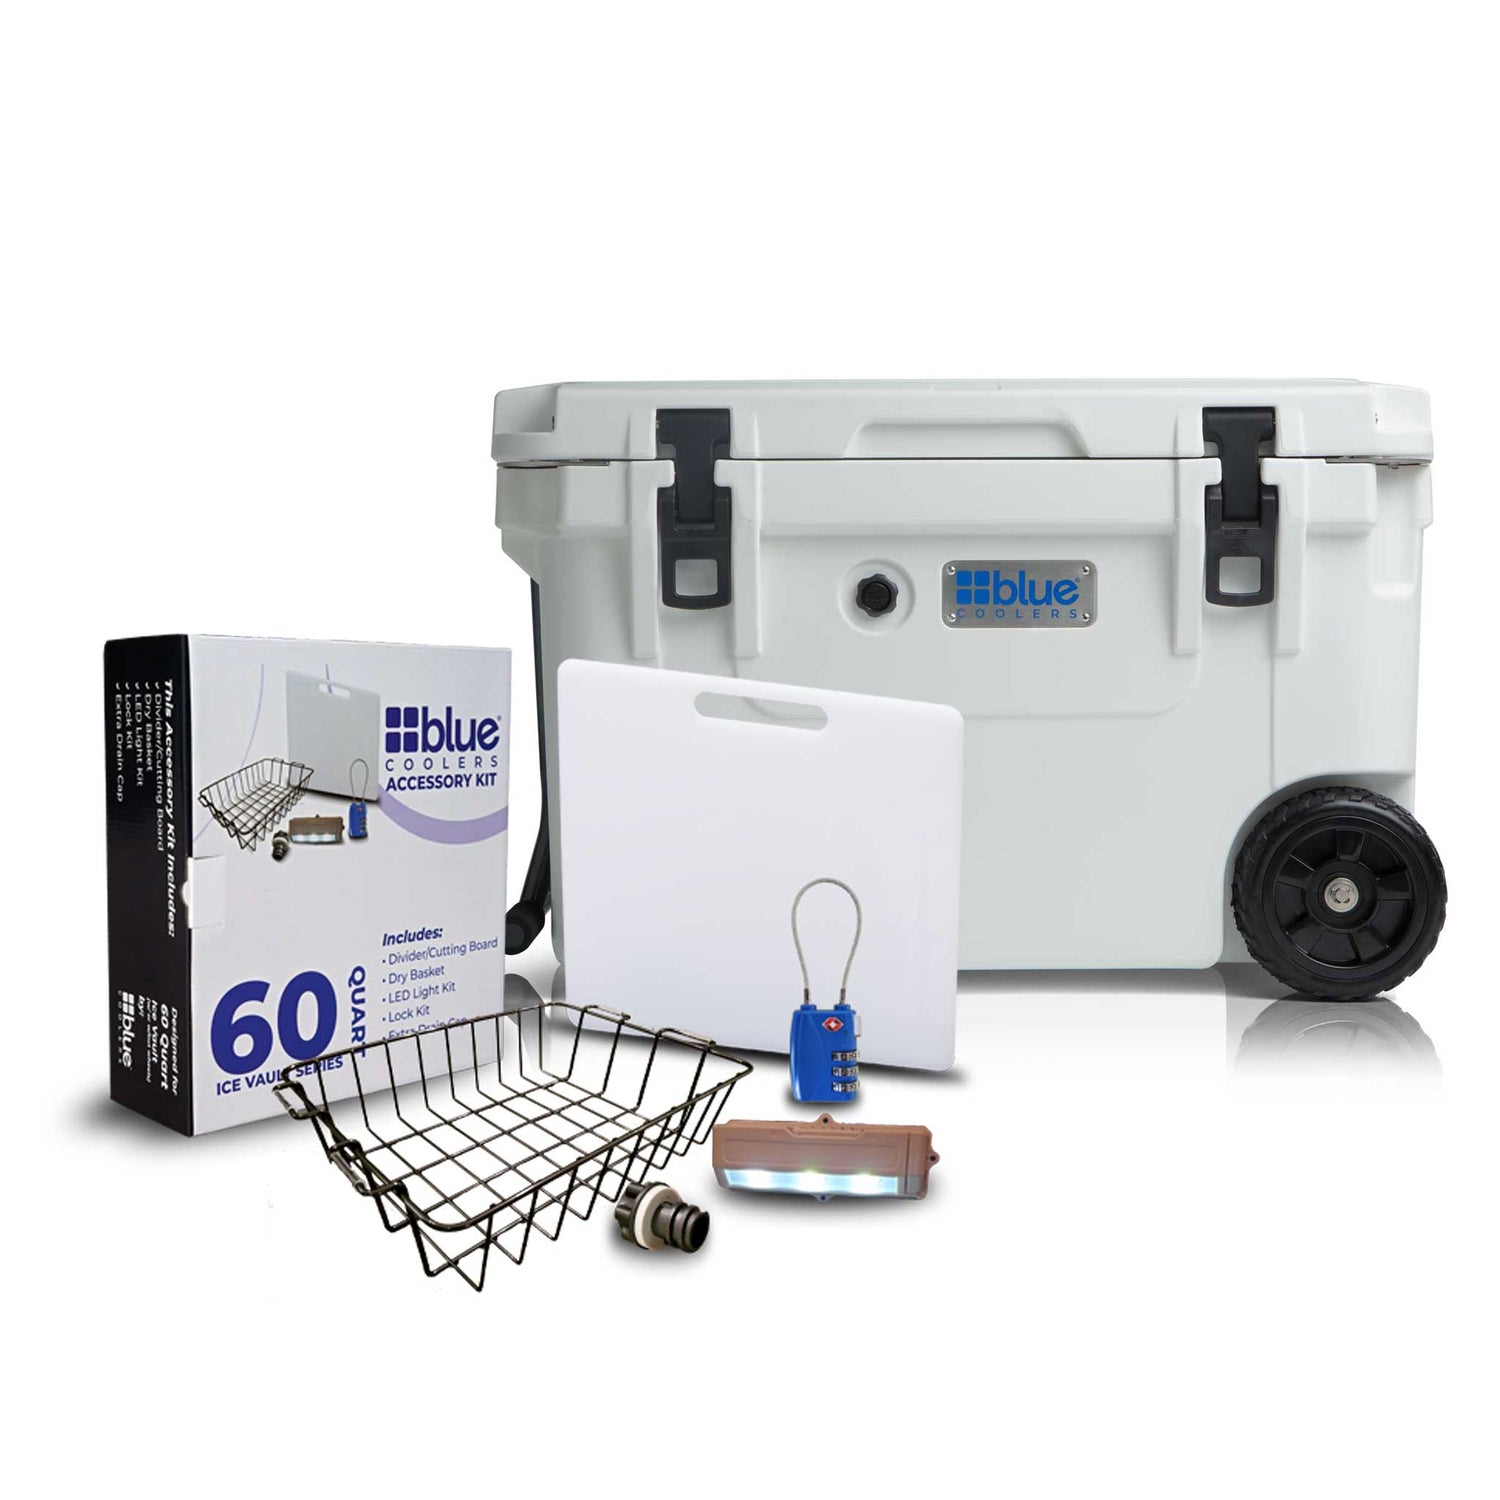 60 Quart Starter Bundle with WHEELS - Includes Accessory Kit